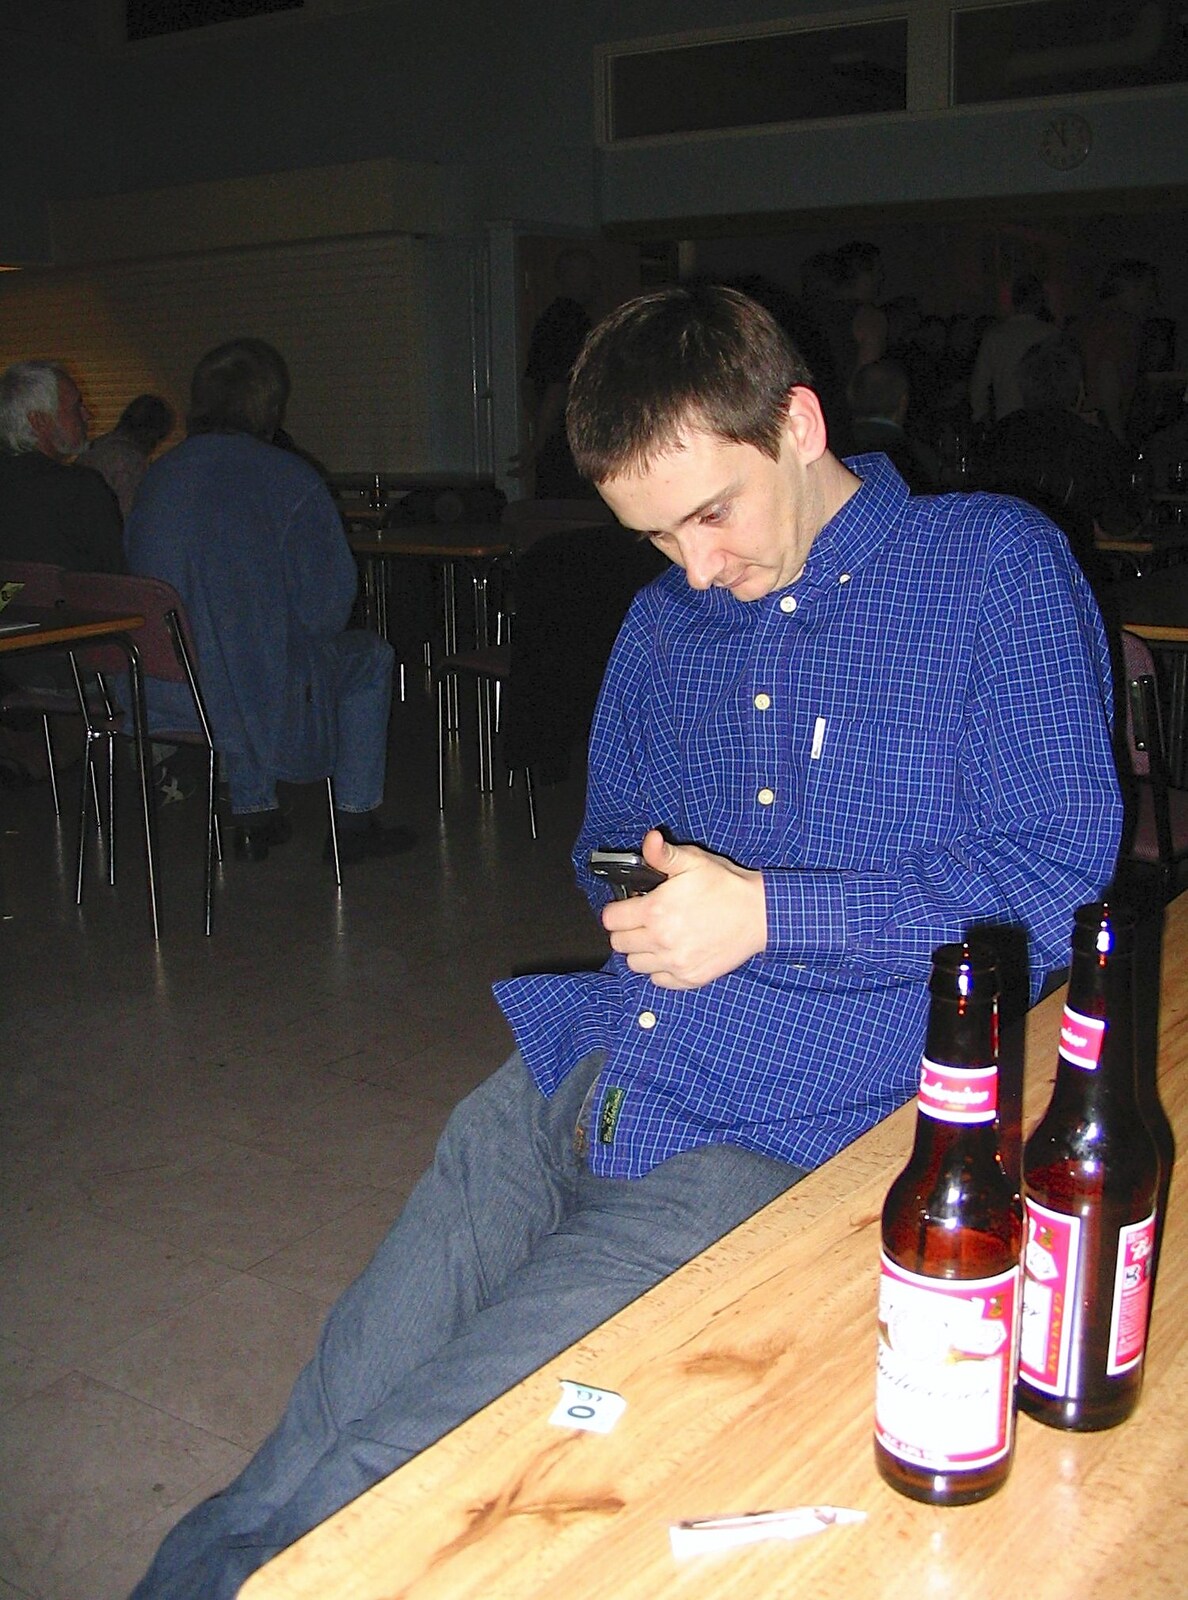 A CISU Blues Festival at the SCC Social Club, and a Million Laptops, Ipswich and Cambridge - 27th November 2004: Andrew's still texting